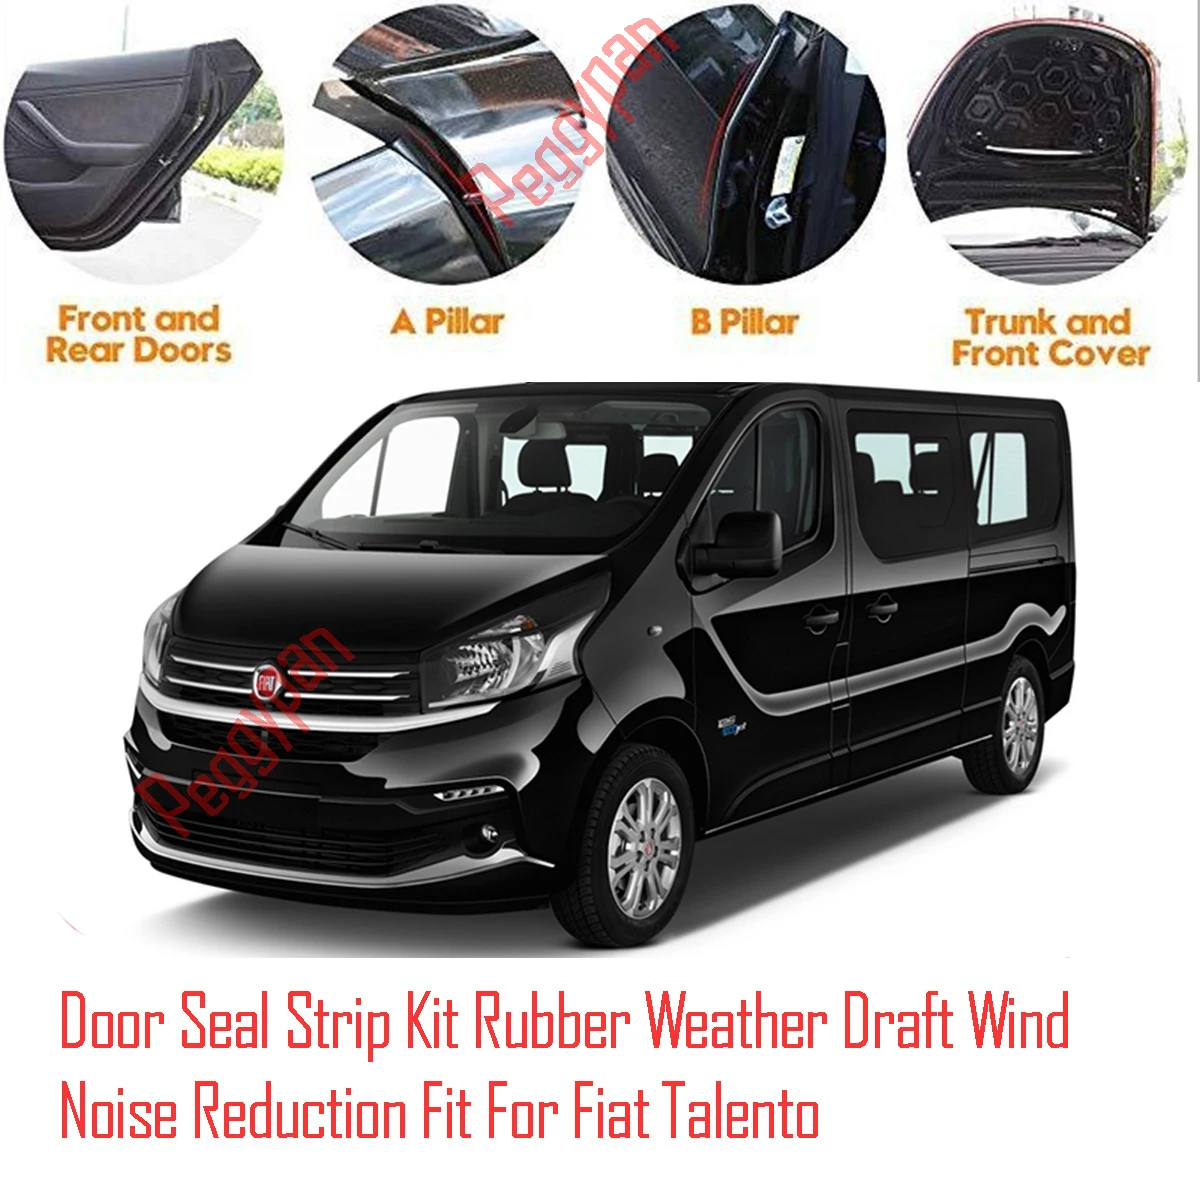 Door Seal Strip Kit Self Adhesive Window Engine Cover Soundproof Rubber Weather Draft Wind Noise Reduction Fit For Fiat Talento